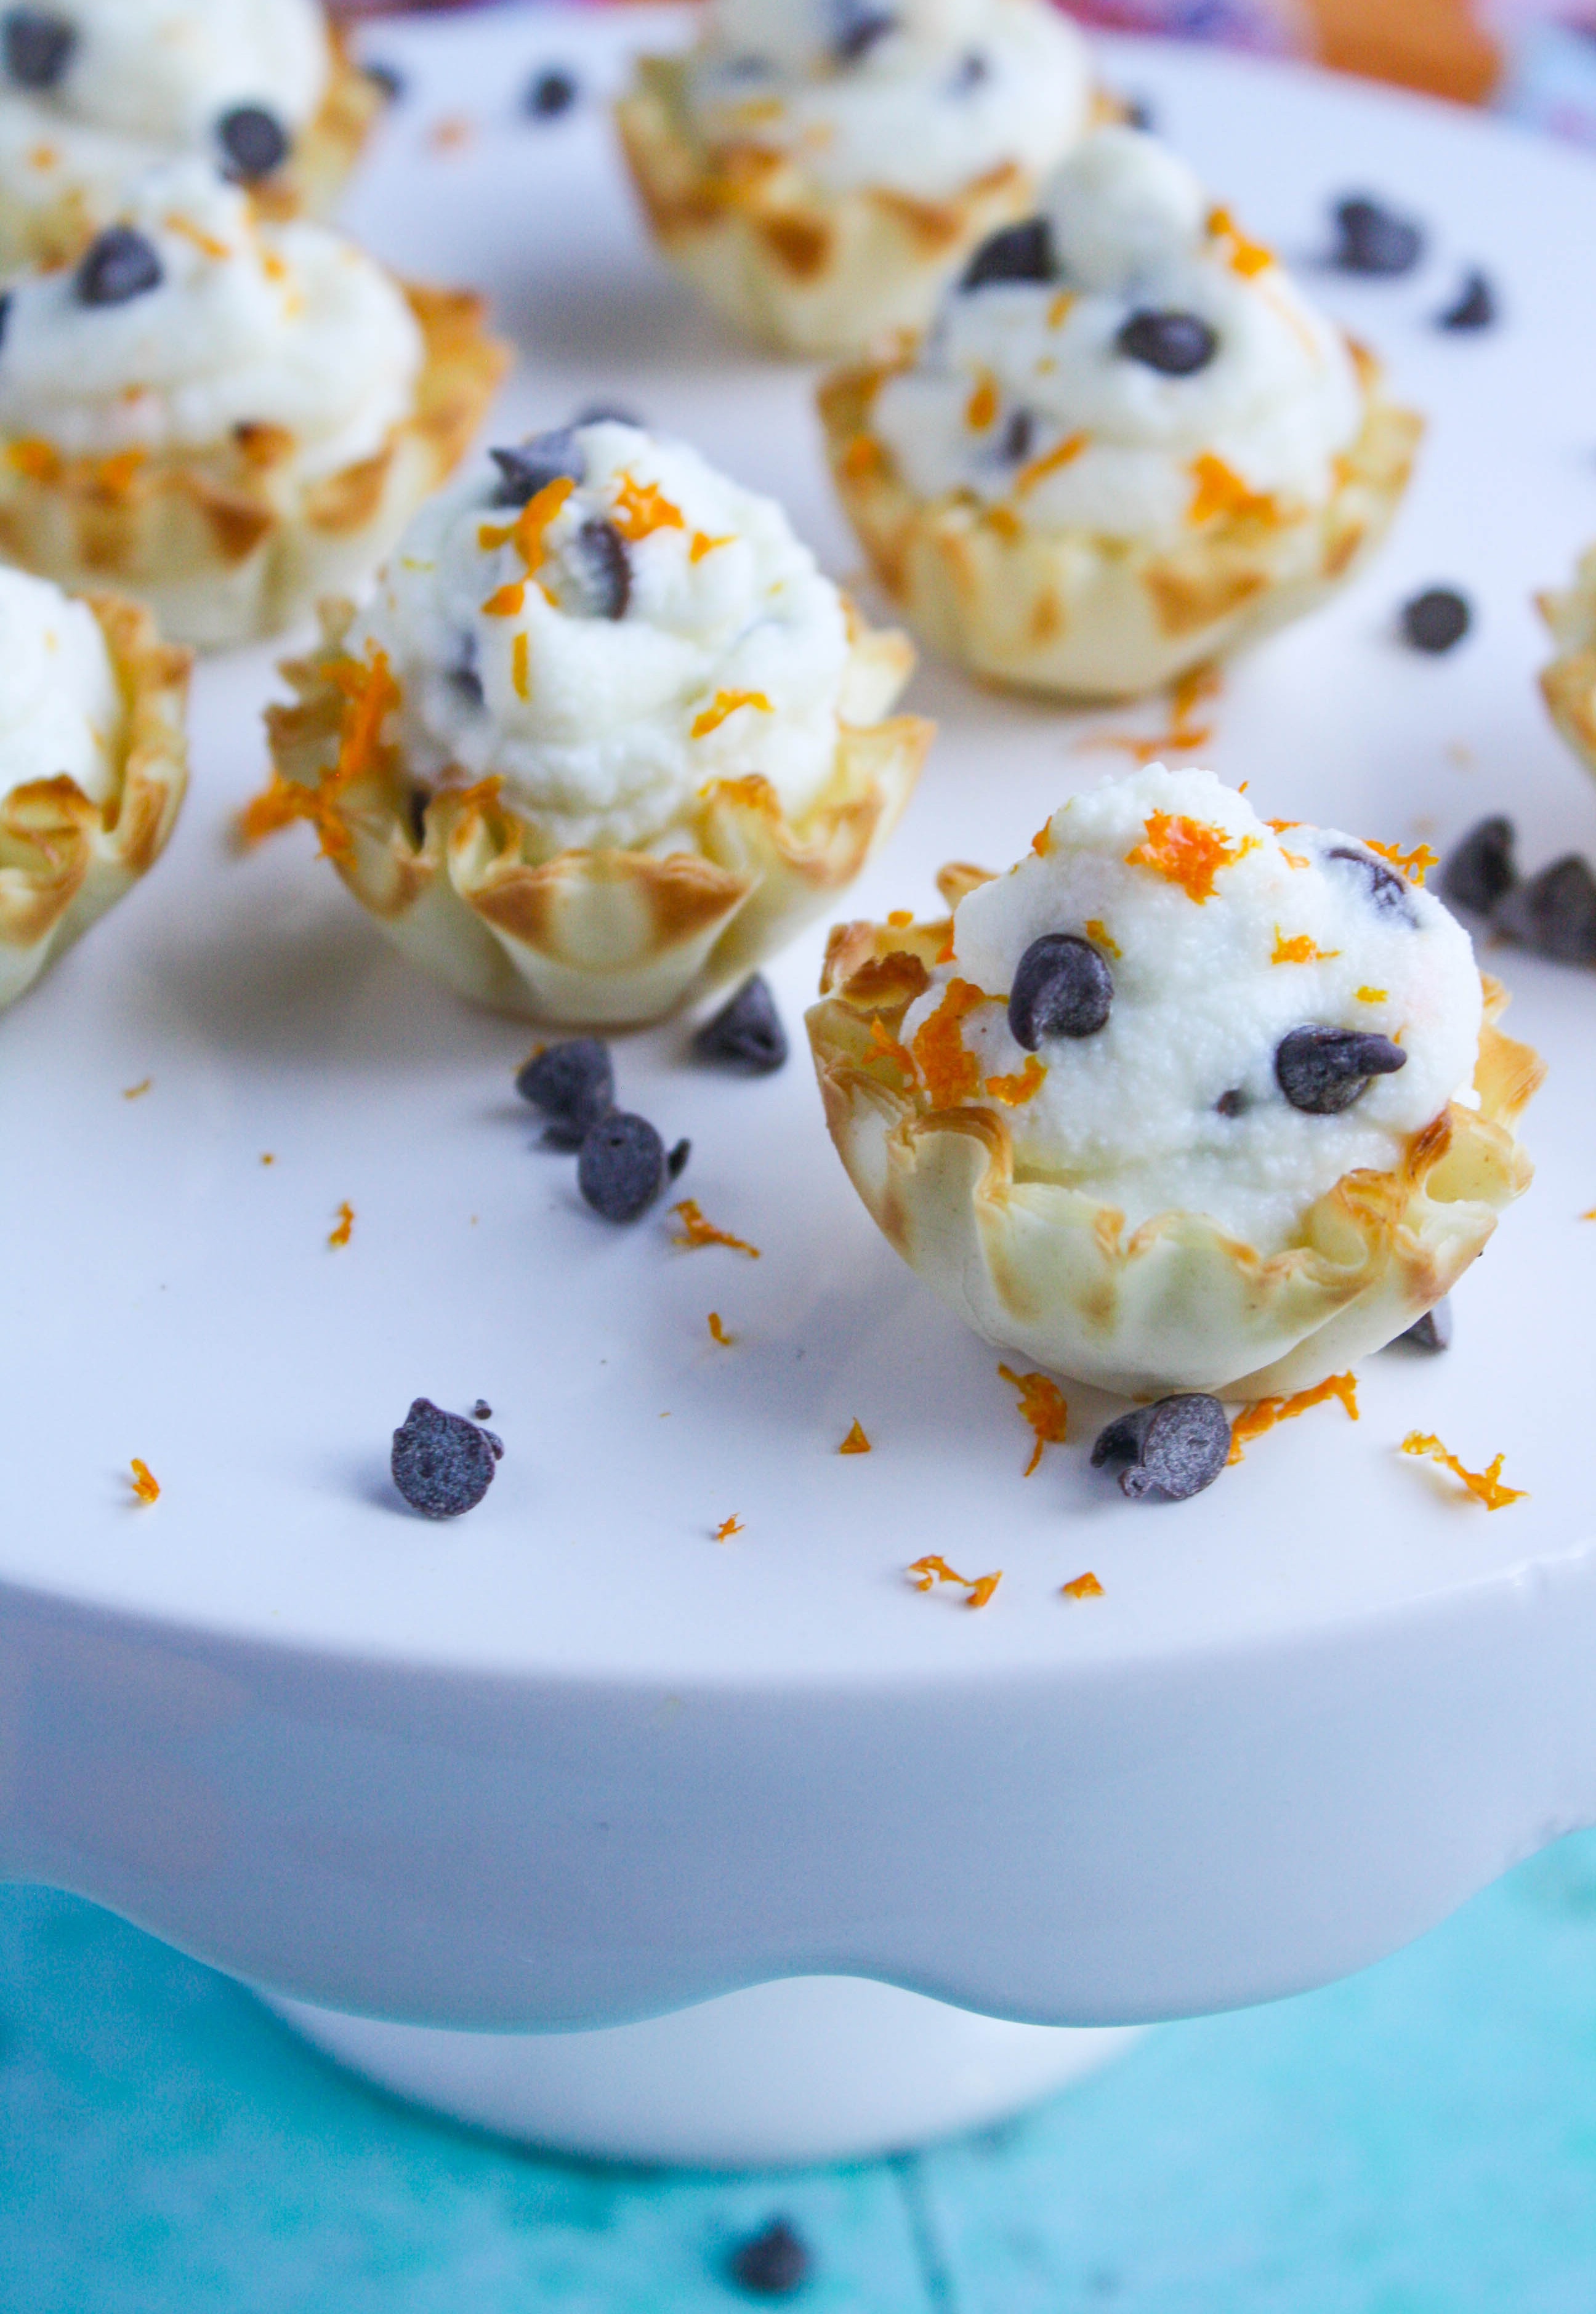 Easy Chocolate Chip-Orange Cannoli Cups are a fun treat for the New Year's celebration, or any fun time. You'll love that these cannoli cups are delicious and so easy to make!